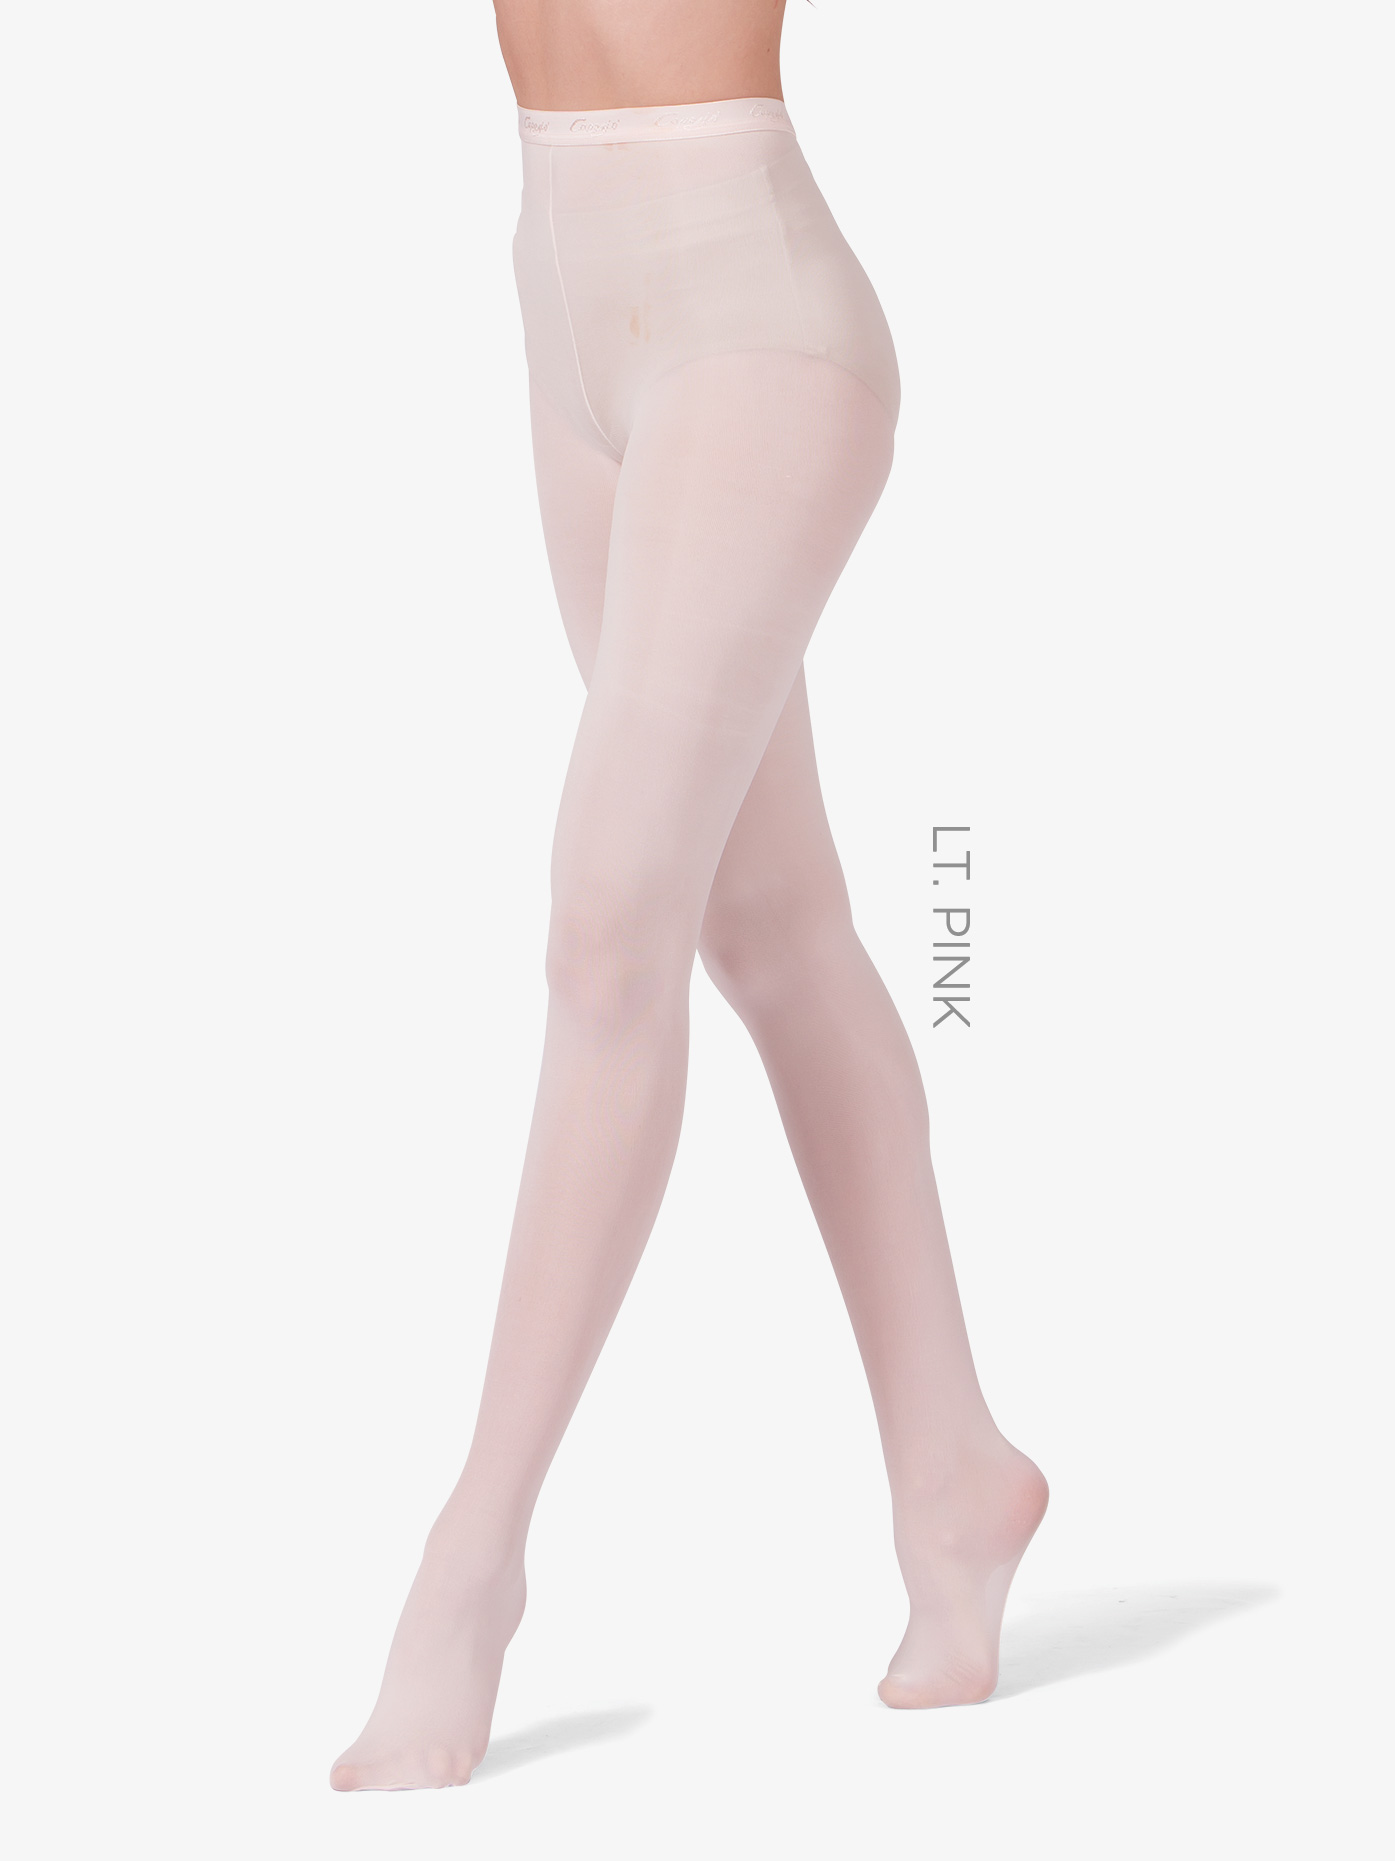 1 Pair Ballet Tights Full Footed//Convertible Soft Thick for Girls Women